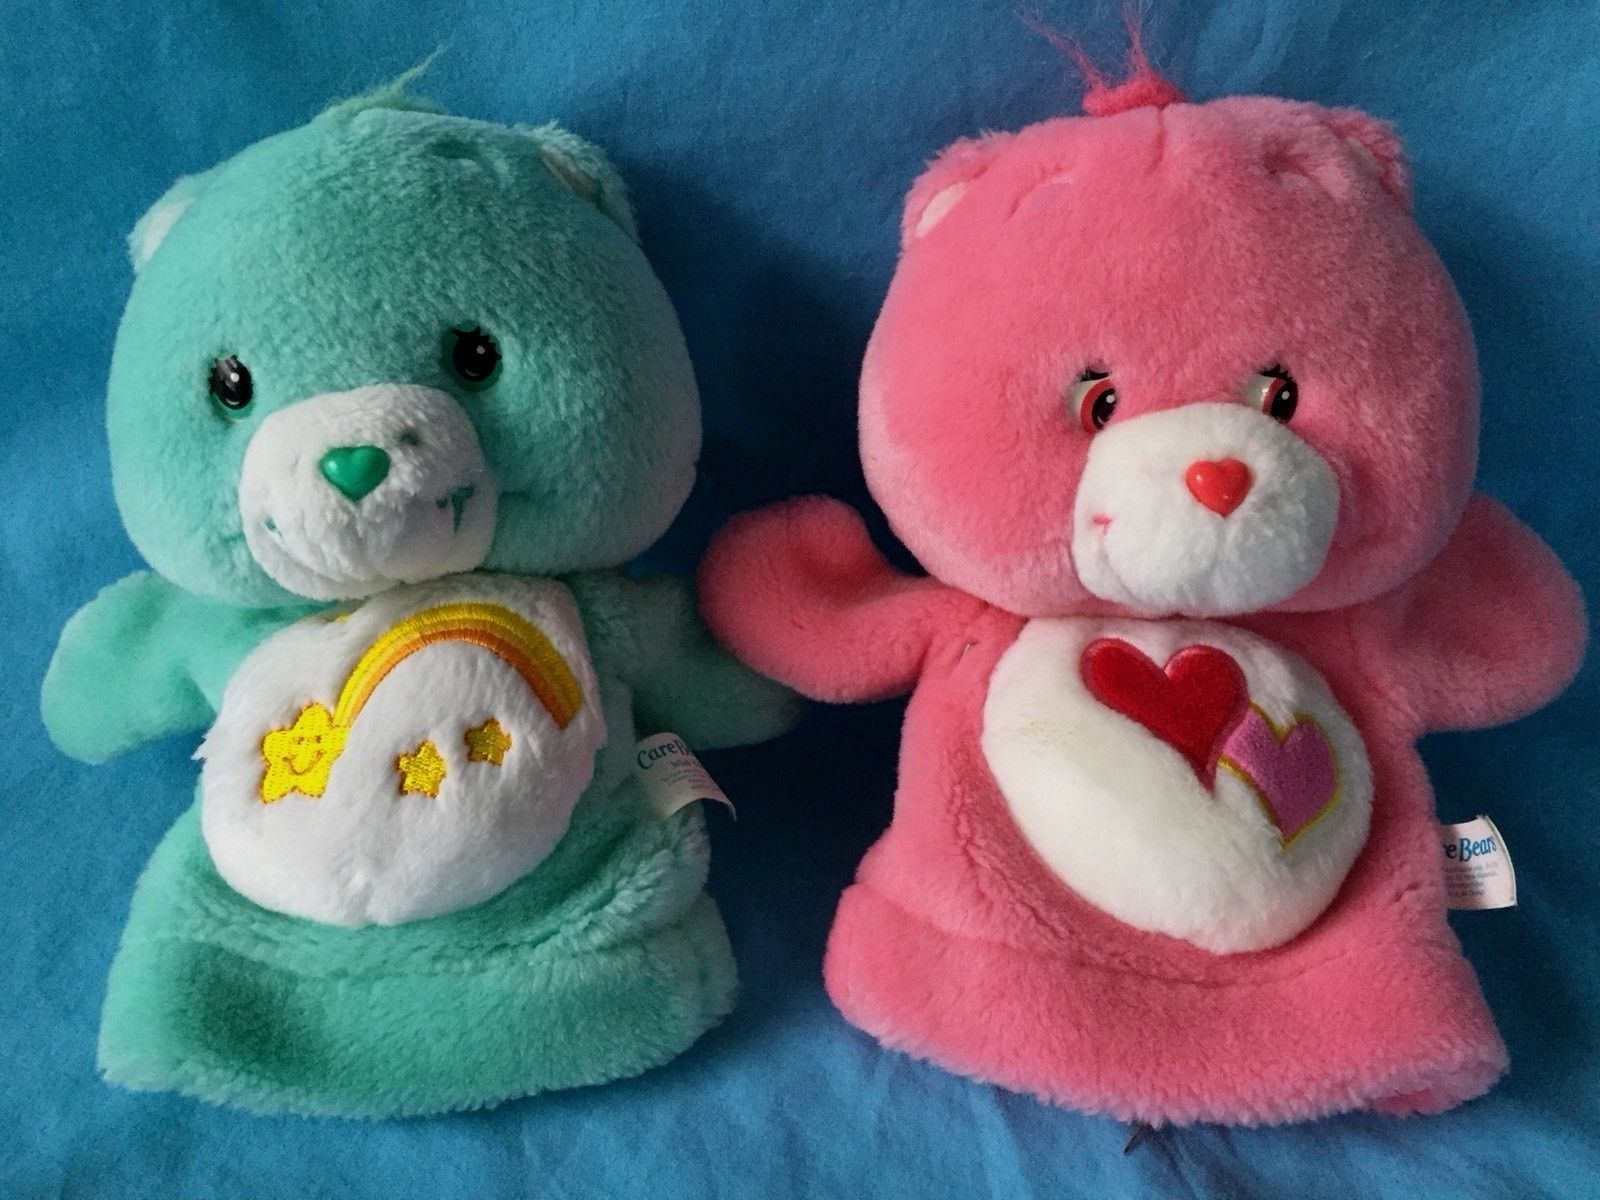 Love A Lot & Wish Bear Care Bears Hand Puppets Play Toys